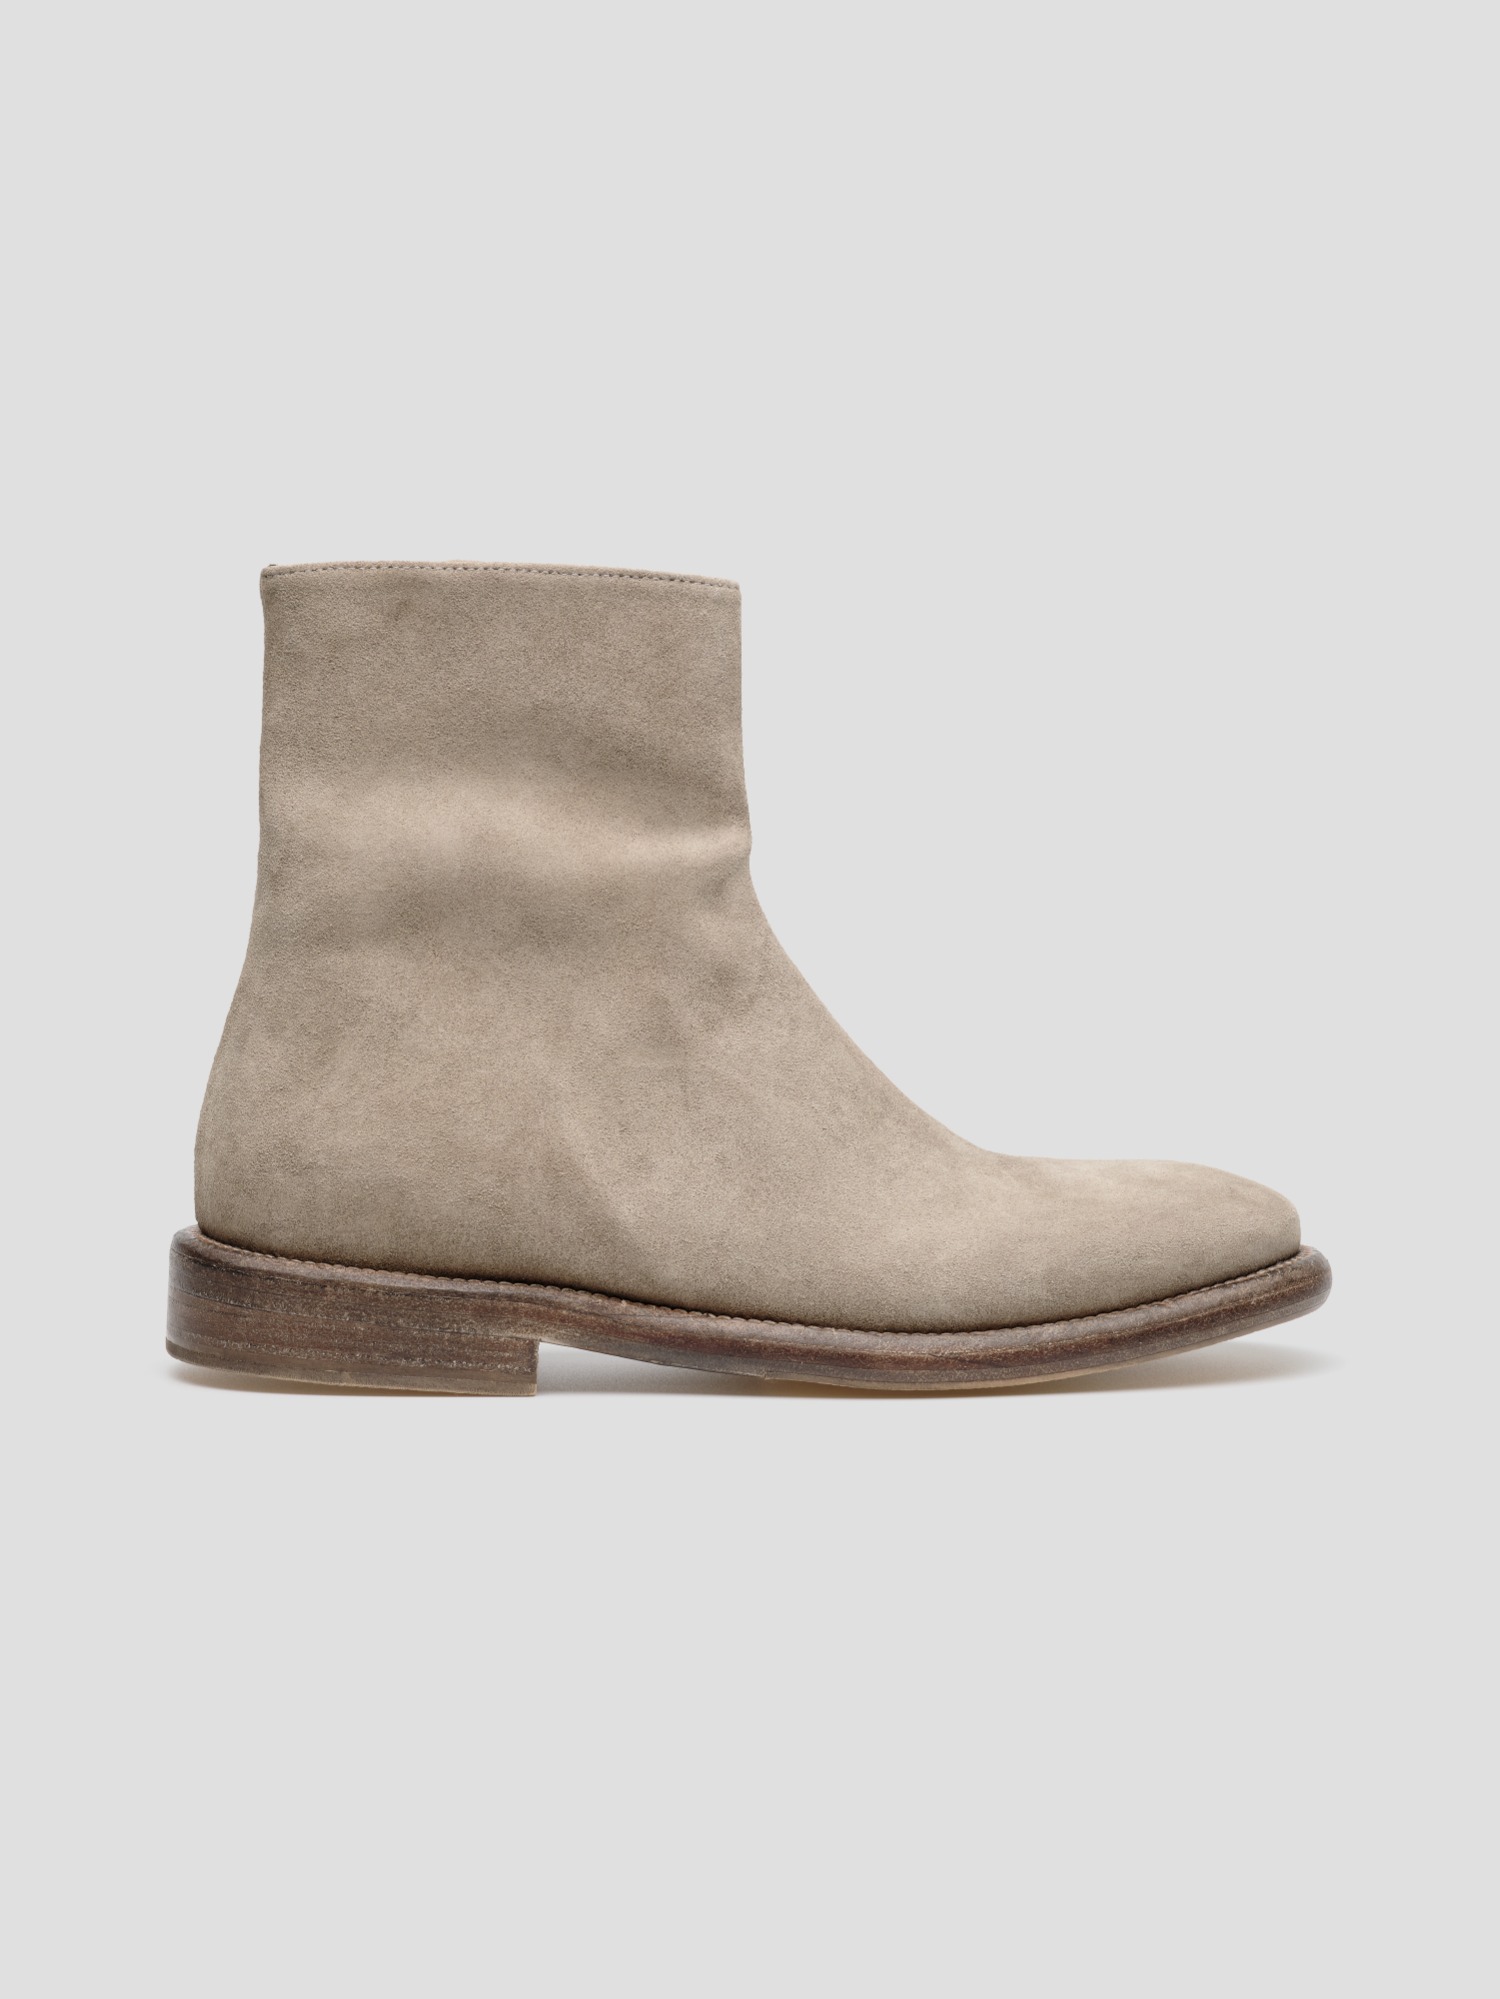 boots 01 suede taupe (only for men) 스니커즈와 구두